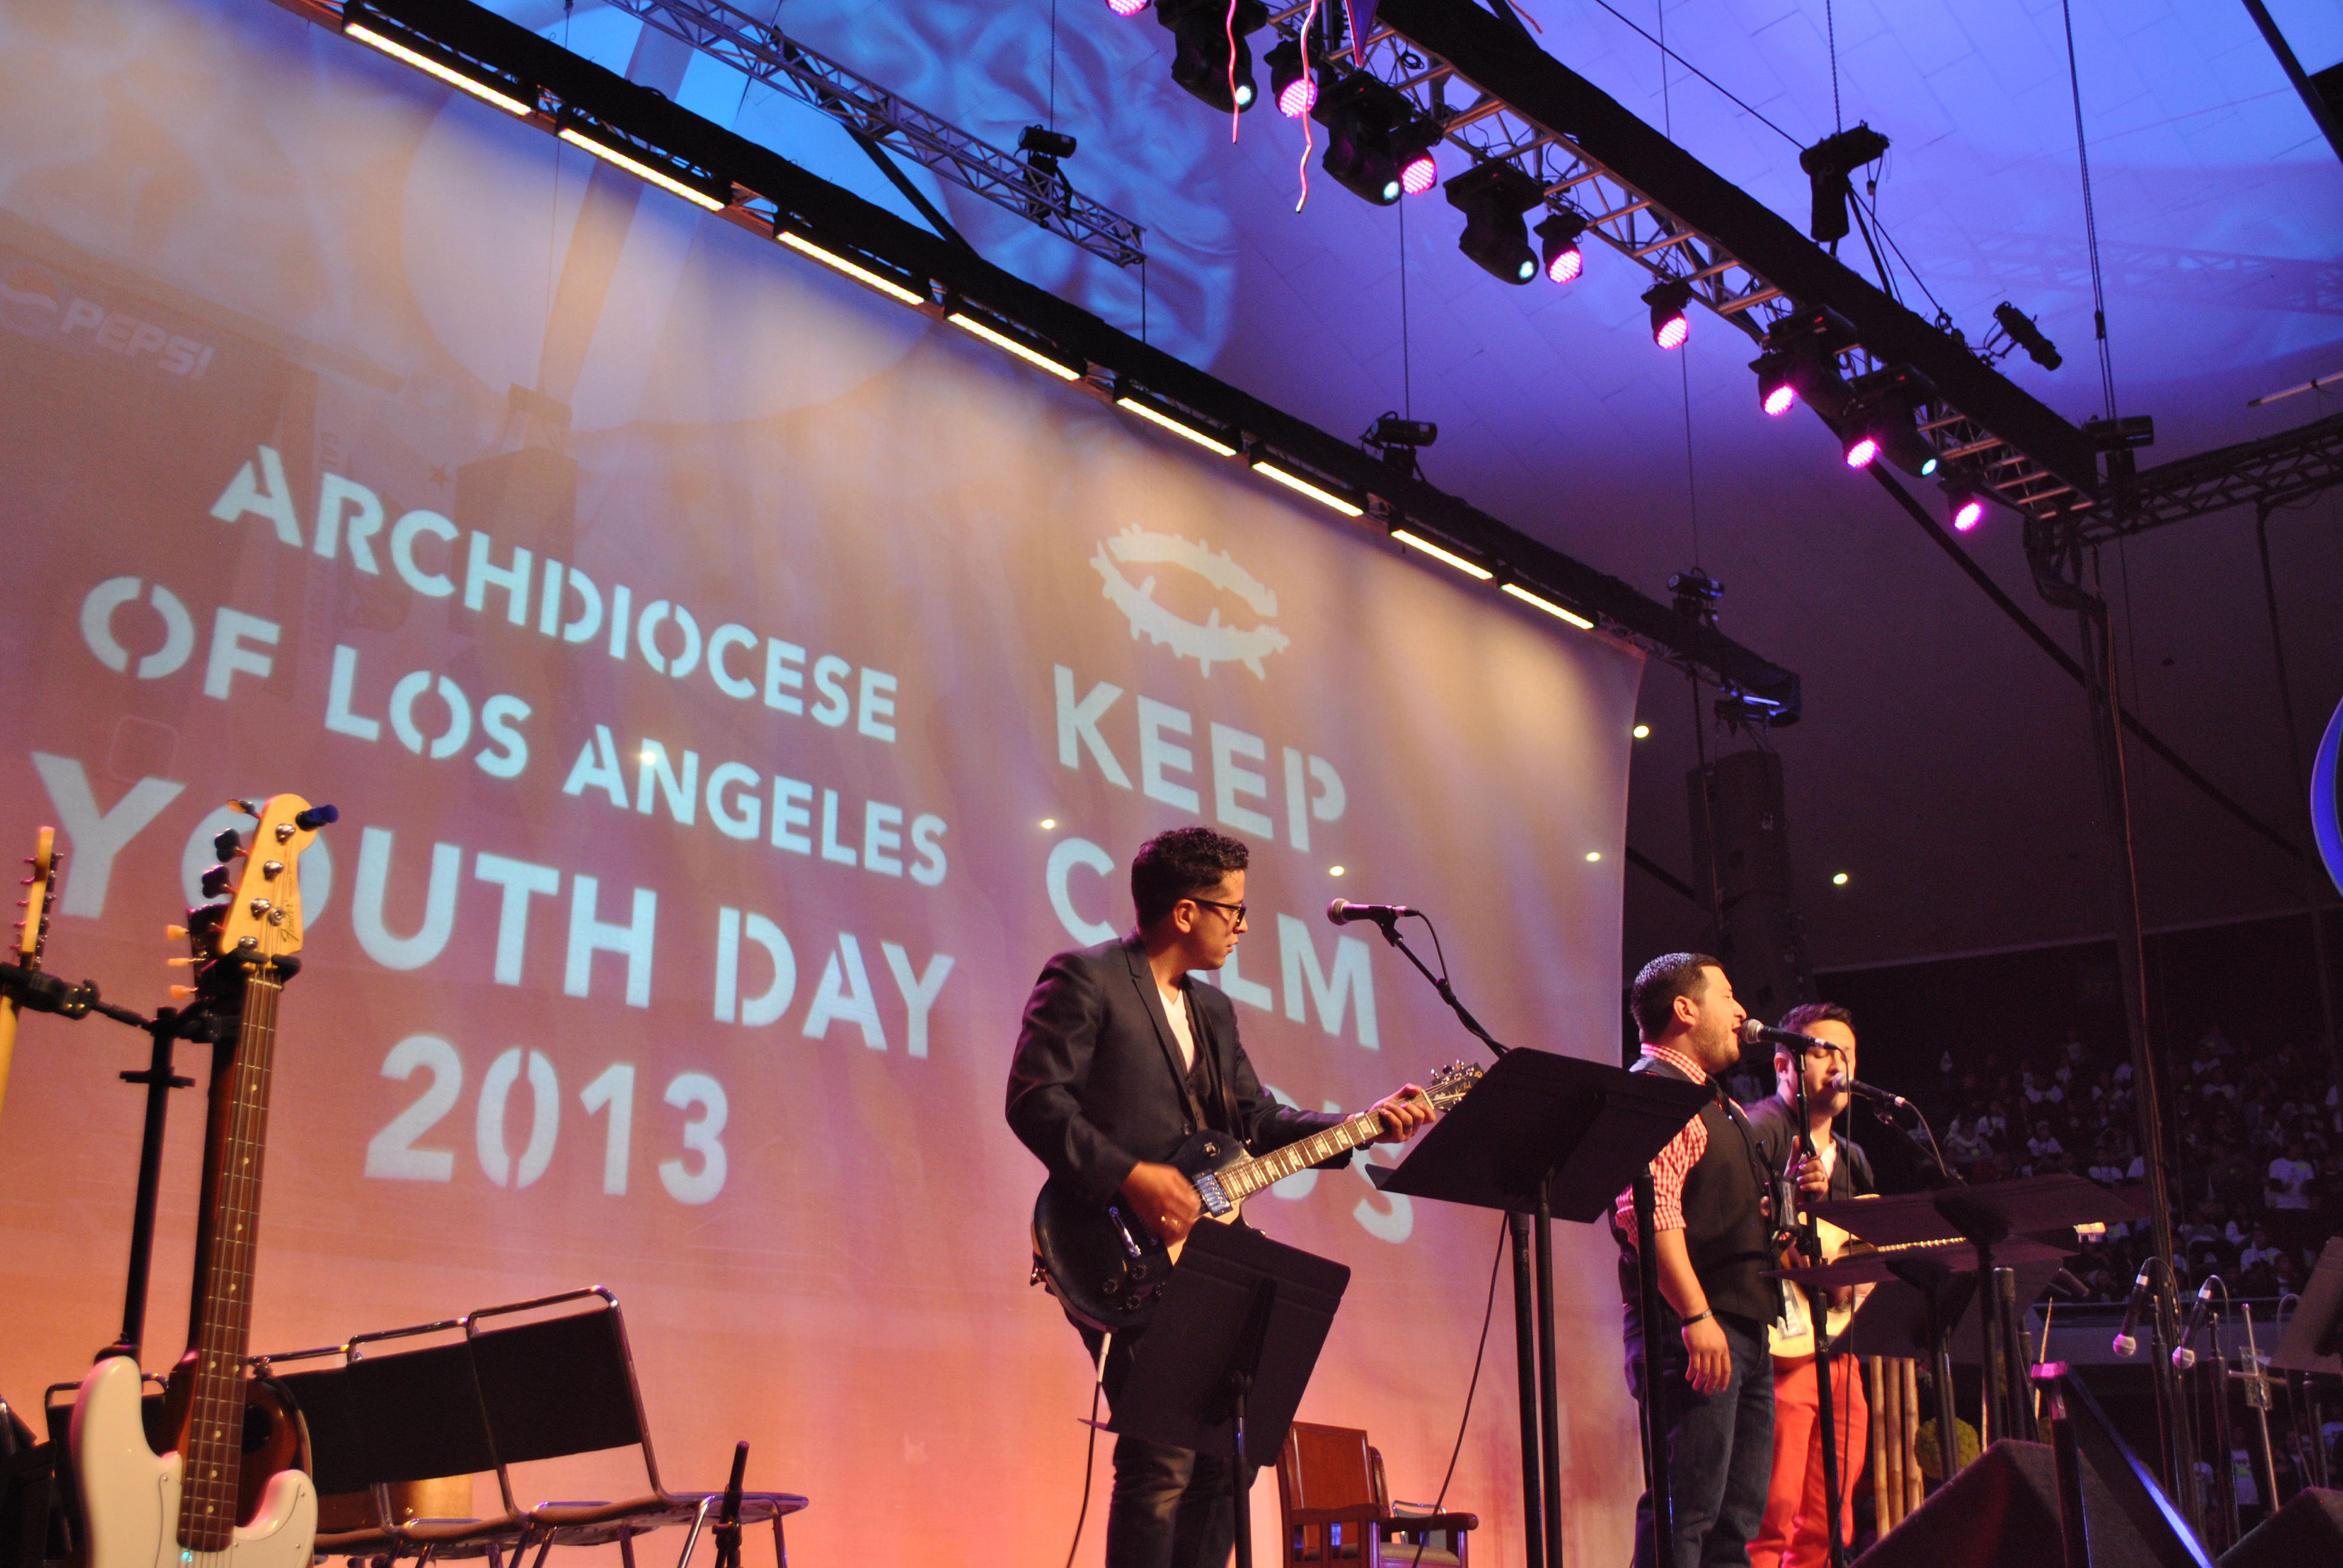 Jacob & Matthew performing in the morning atYouth Day